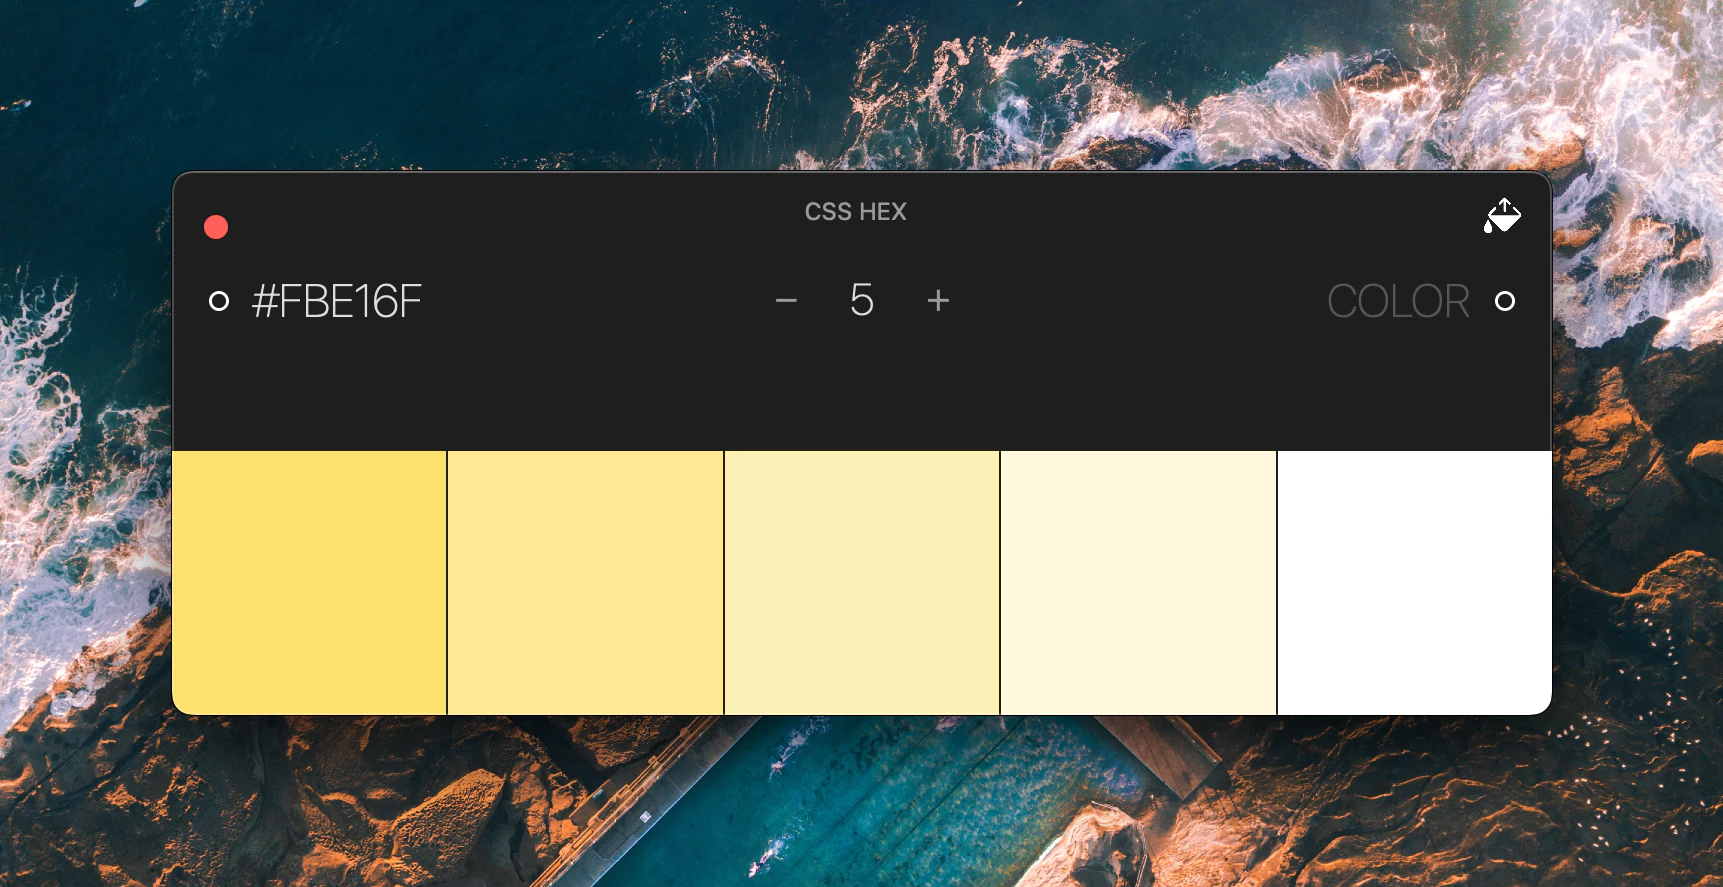 If you do not enter a color number, the default color is white.